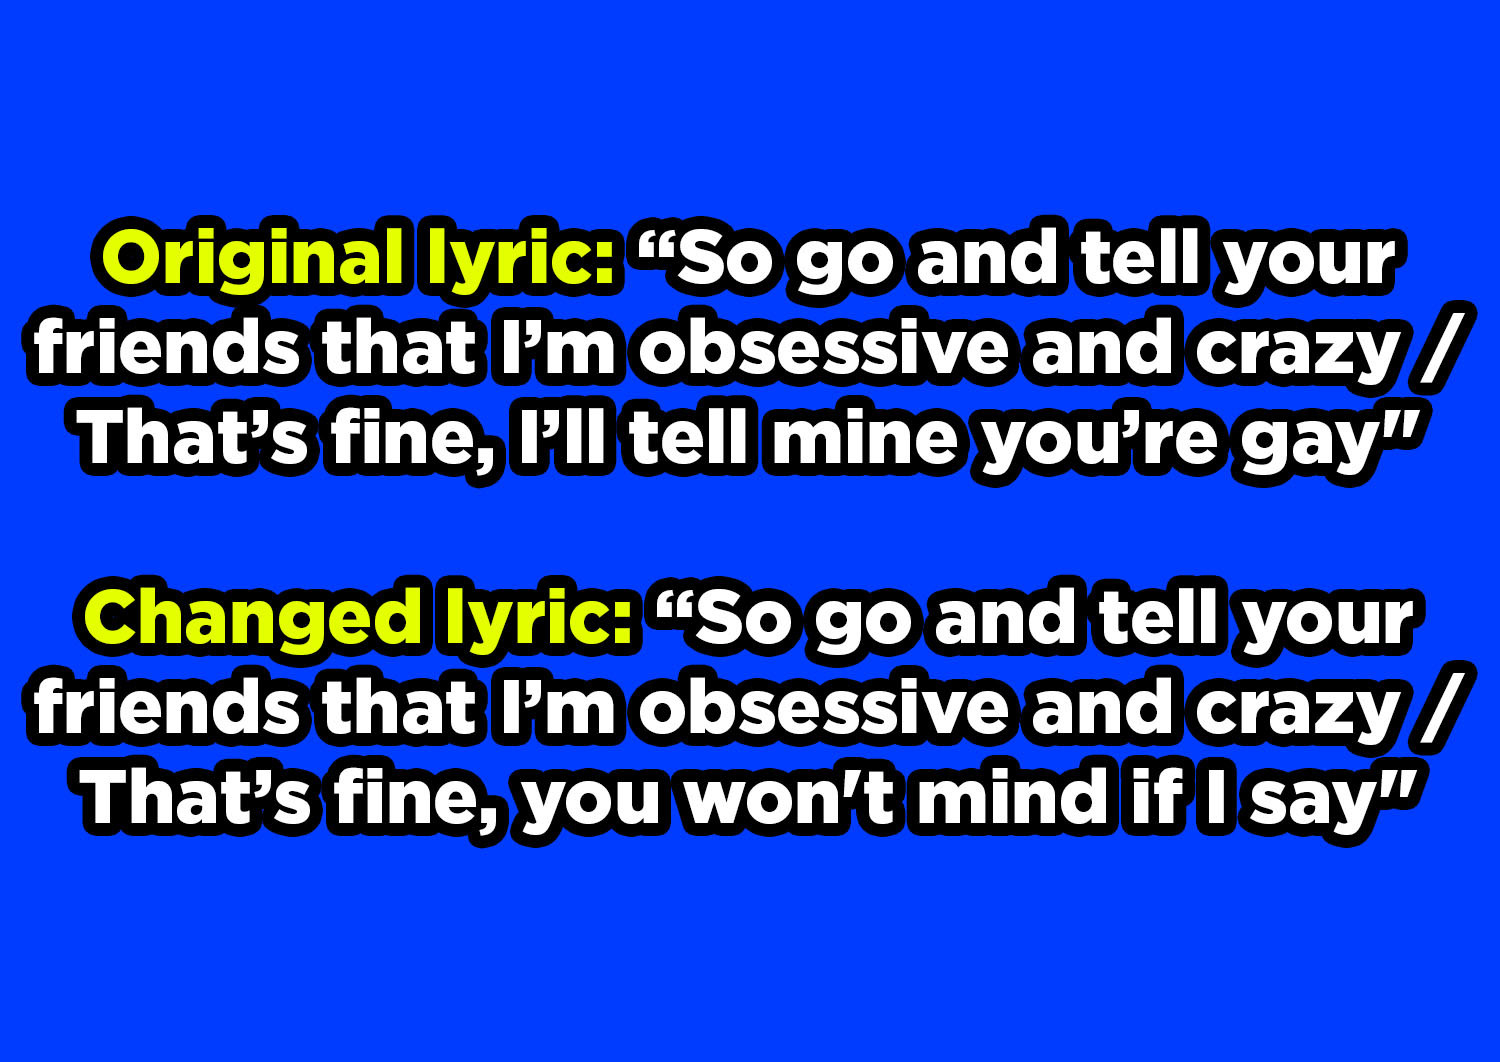 After &quot;So go and tell your friends that I&#x27;m obsessive and crazy, that&#x27;s fine,&quot; part of original lyric &quot;I&#x27;ll tell mine you&#x27;re gay&quot; changed to &quot;you won&#x27;t mind if I say&quot;